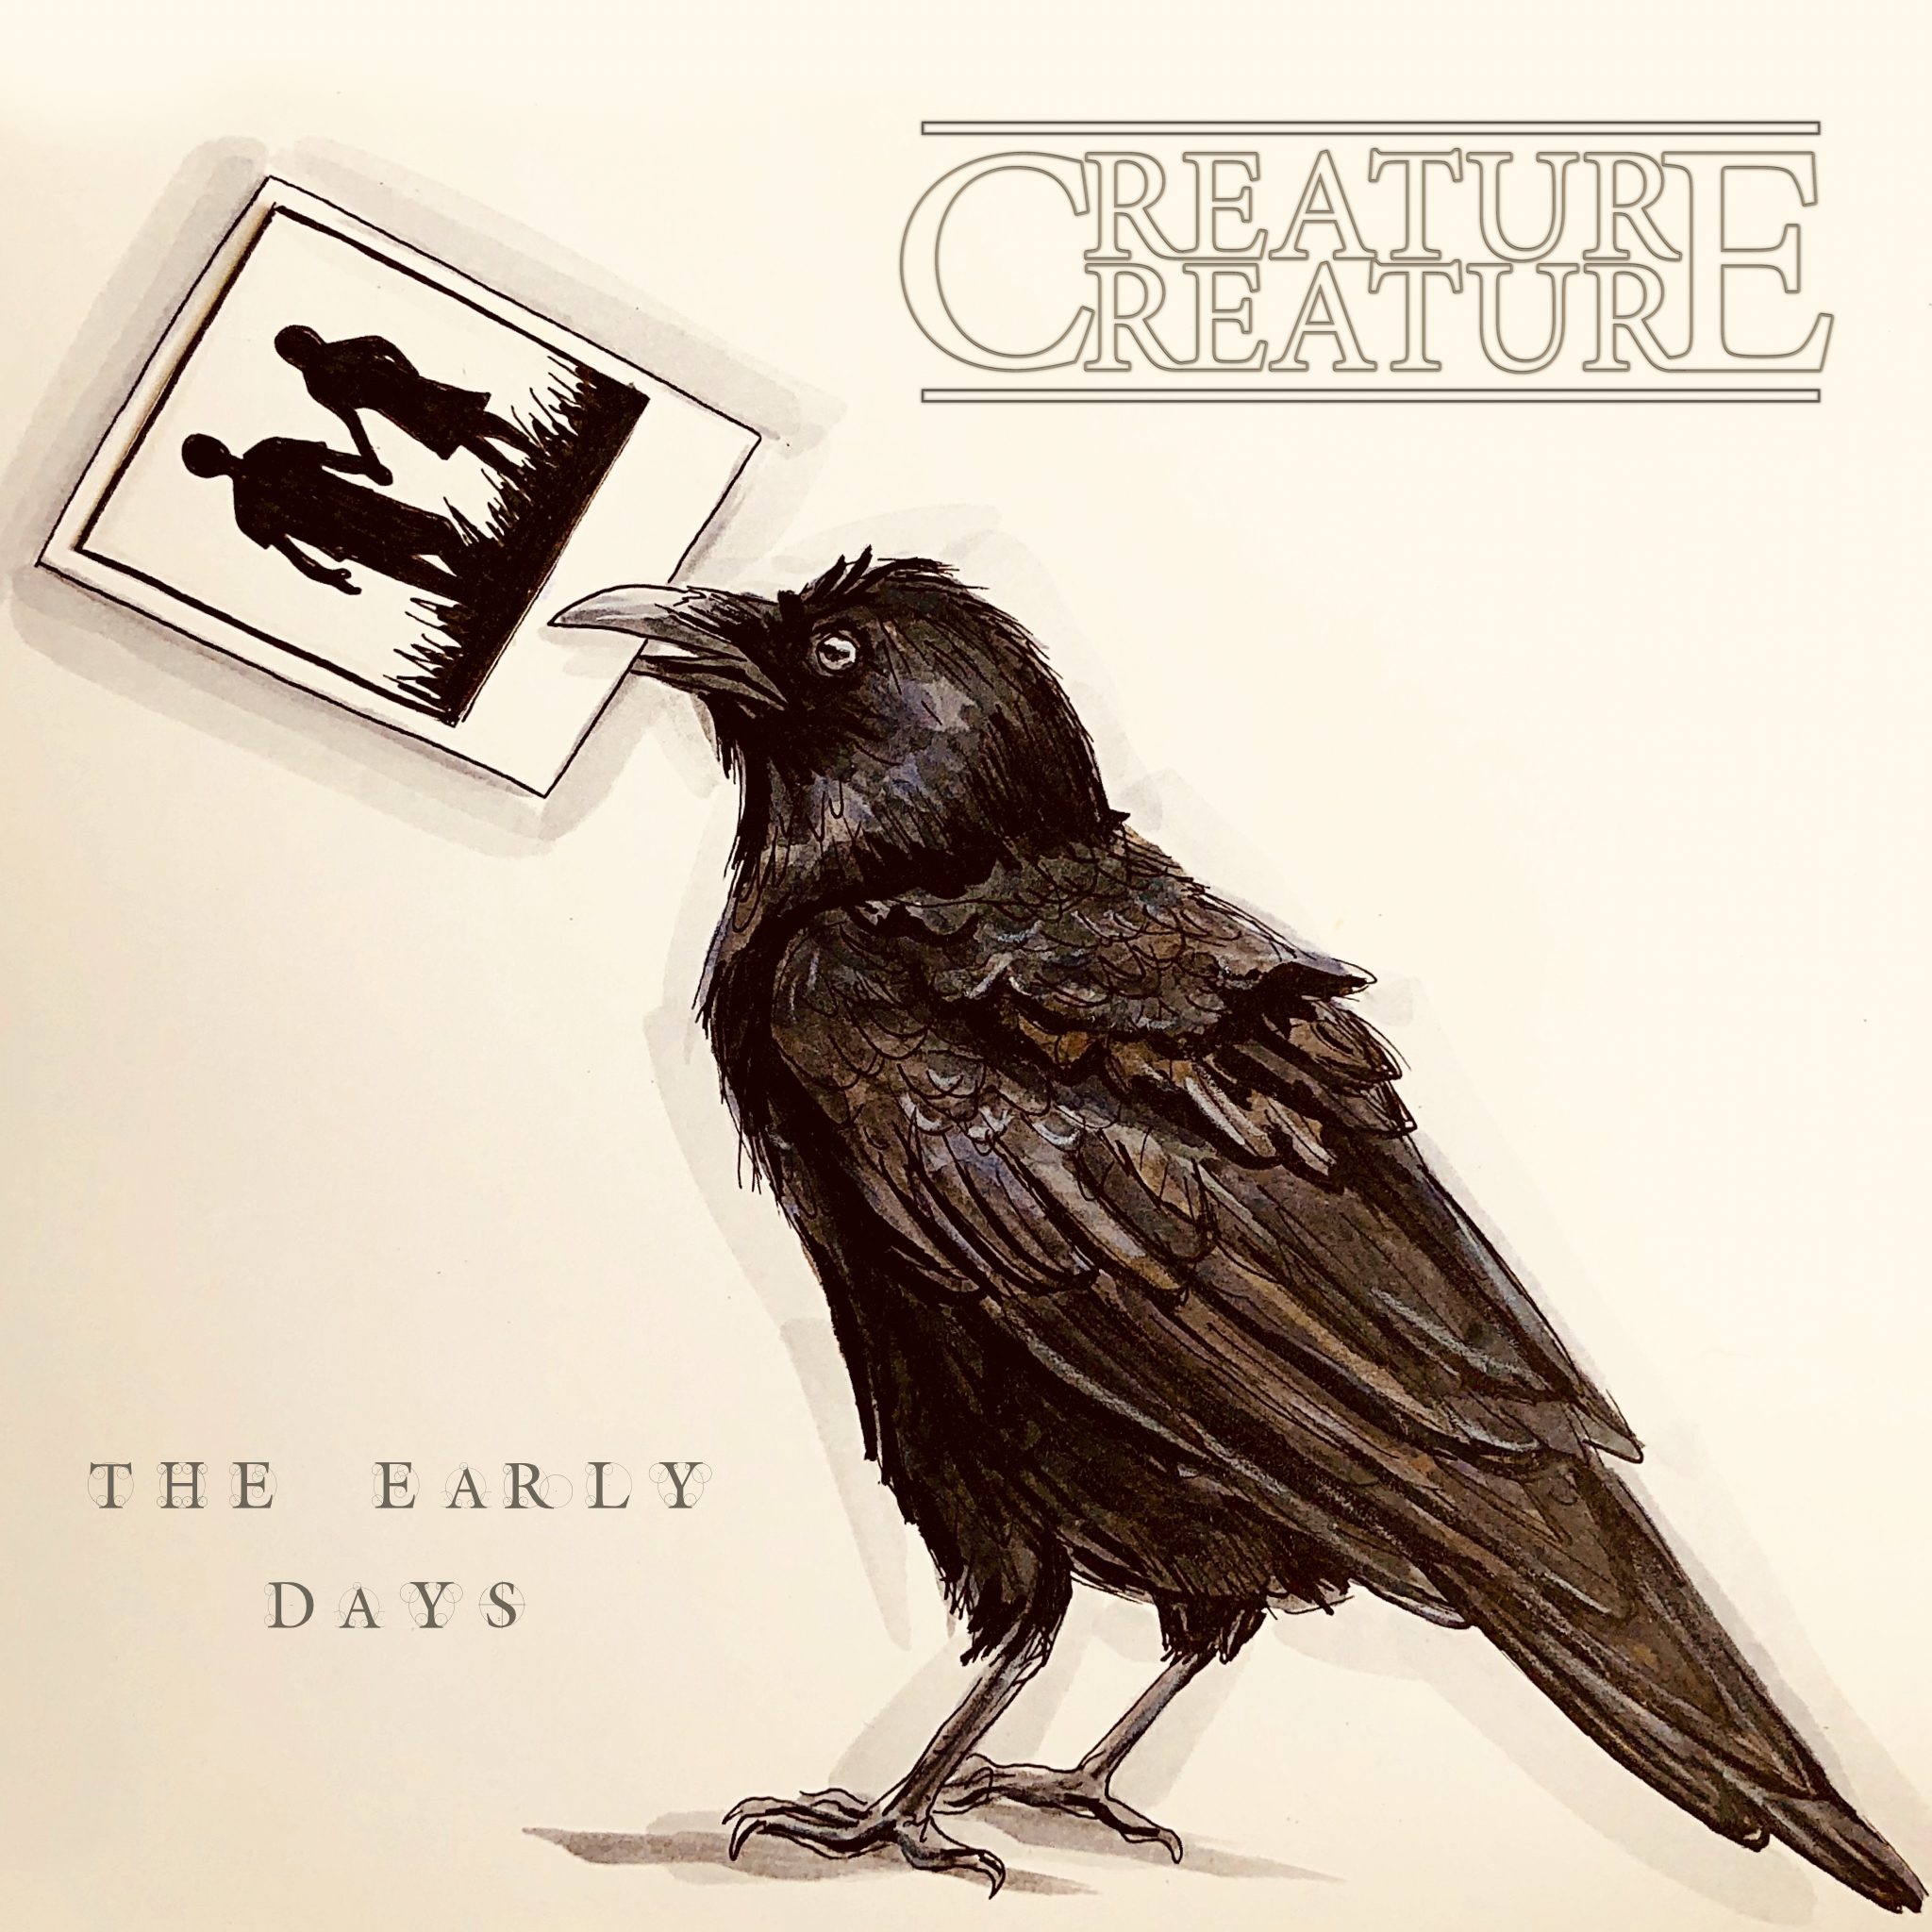 Creature Creature "The Early Days" single artwork